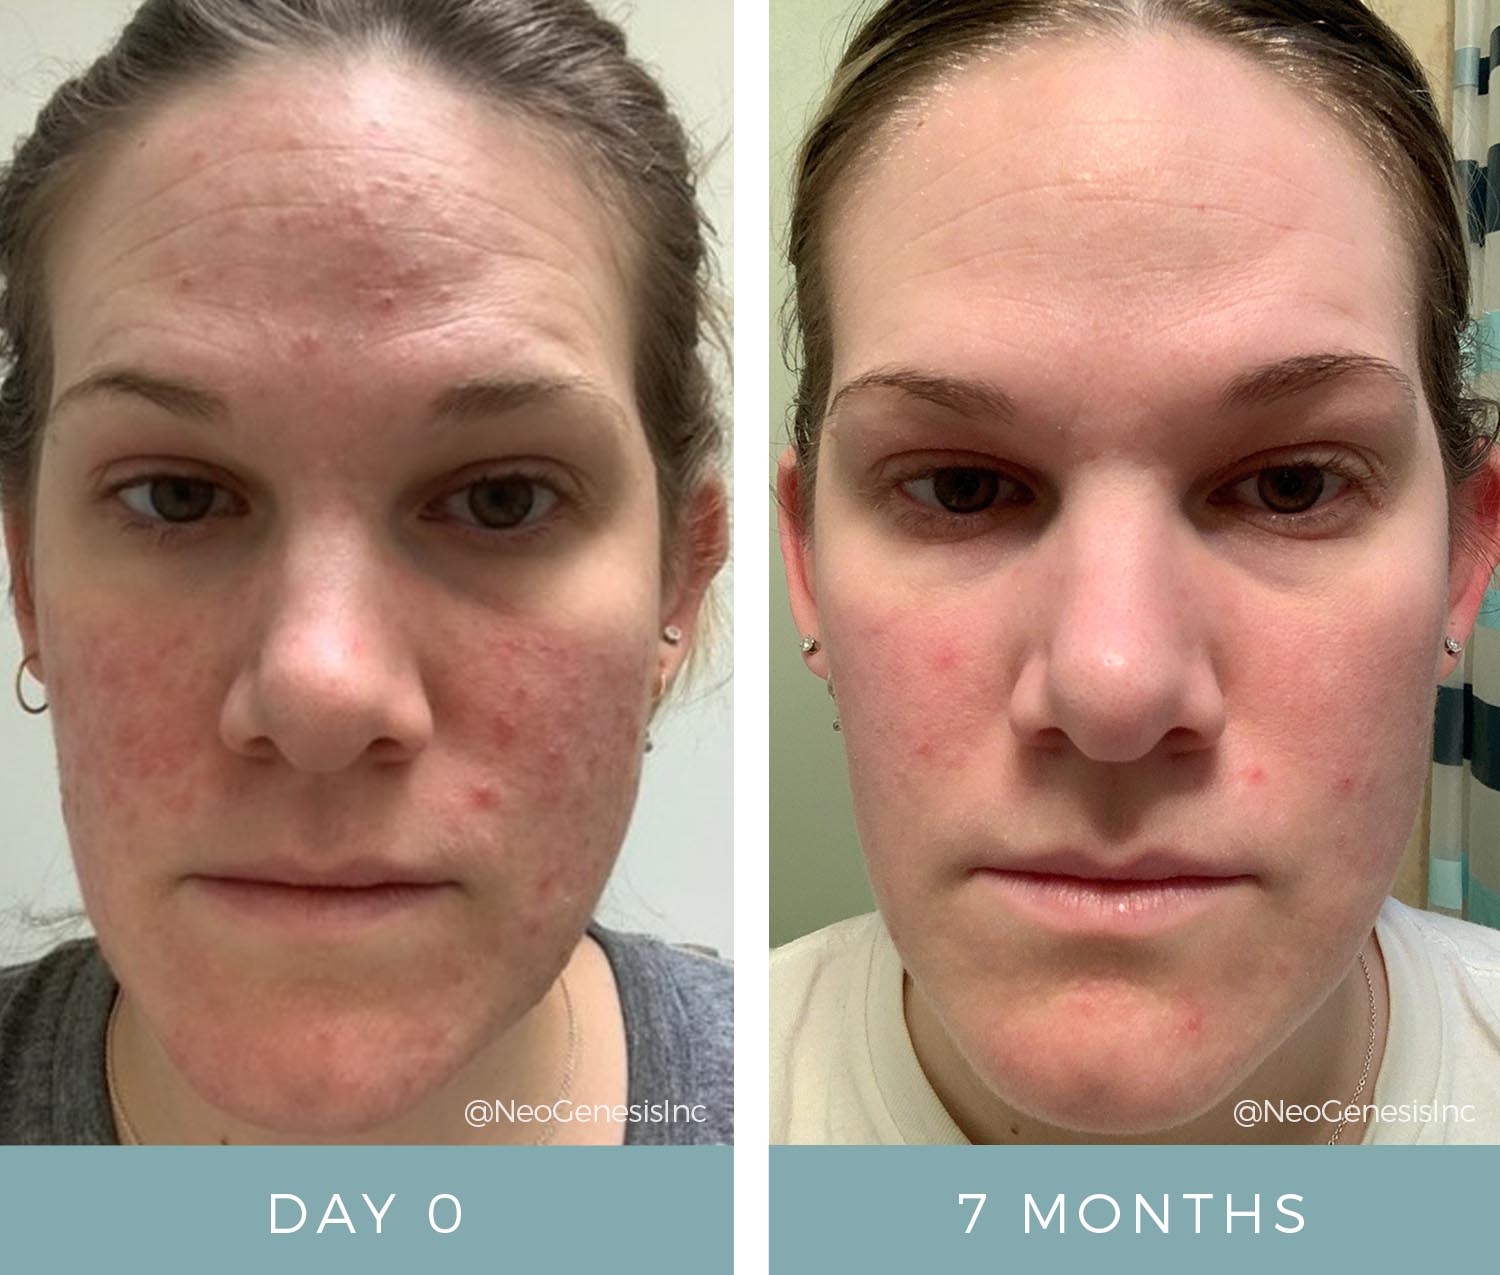 Before + After - Rosacea